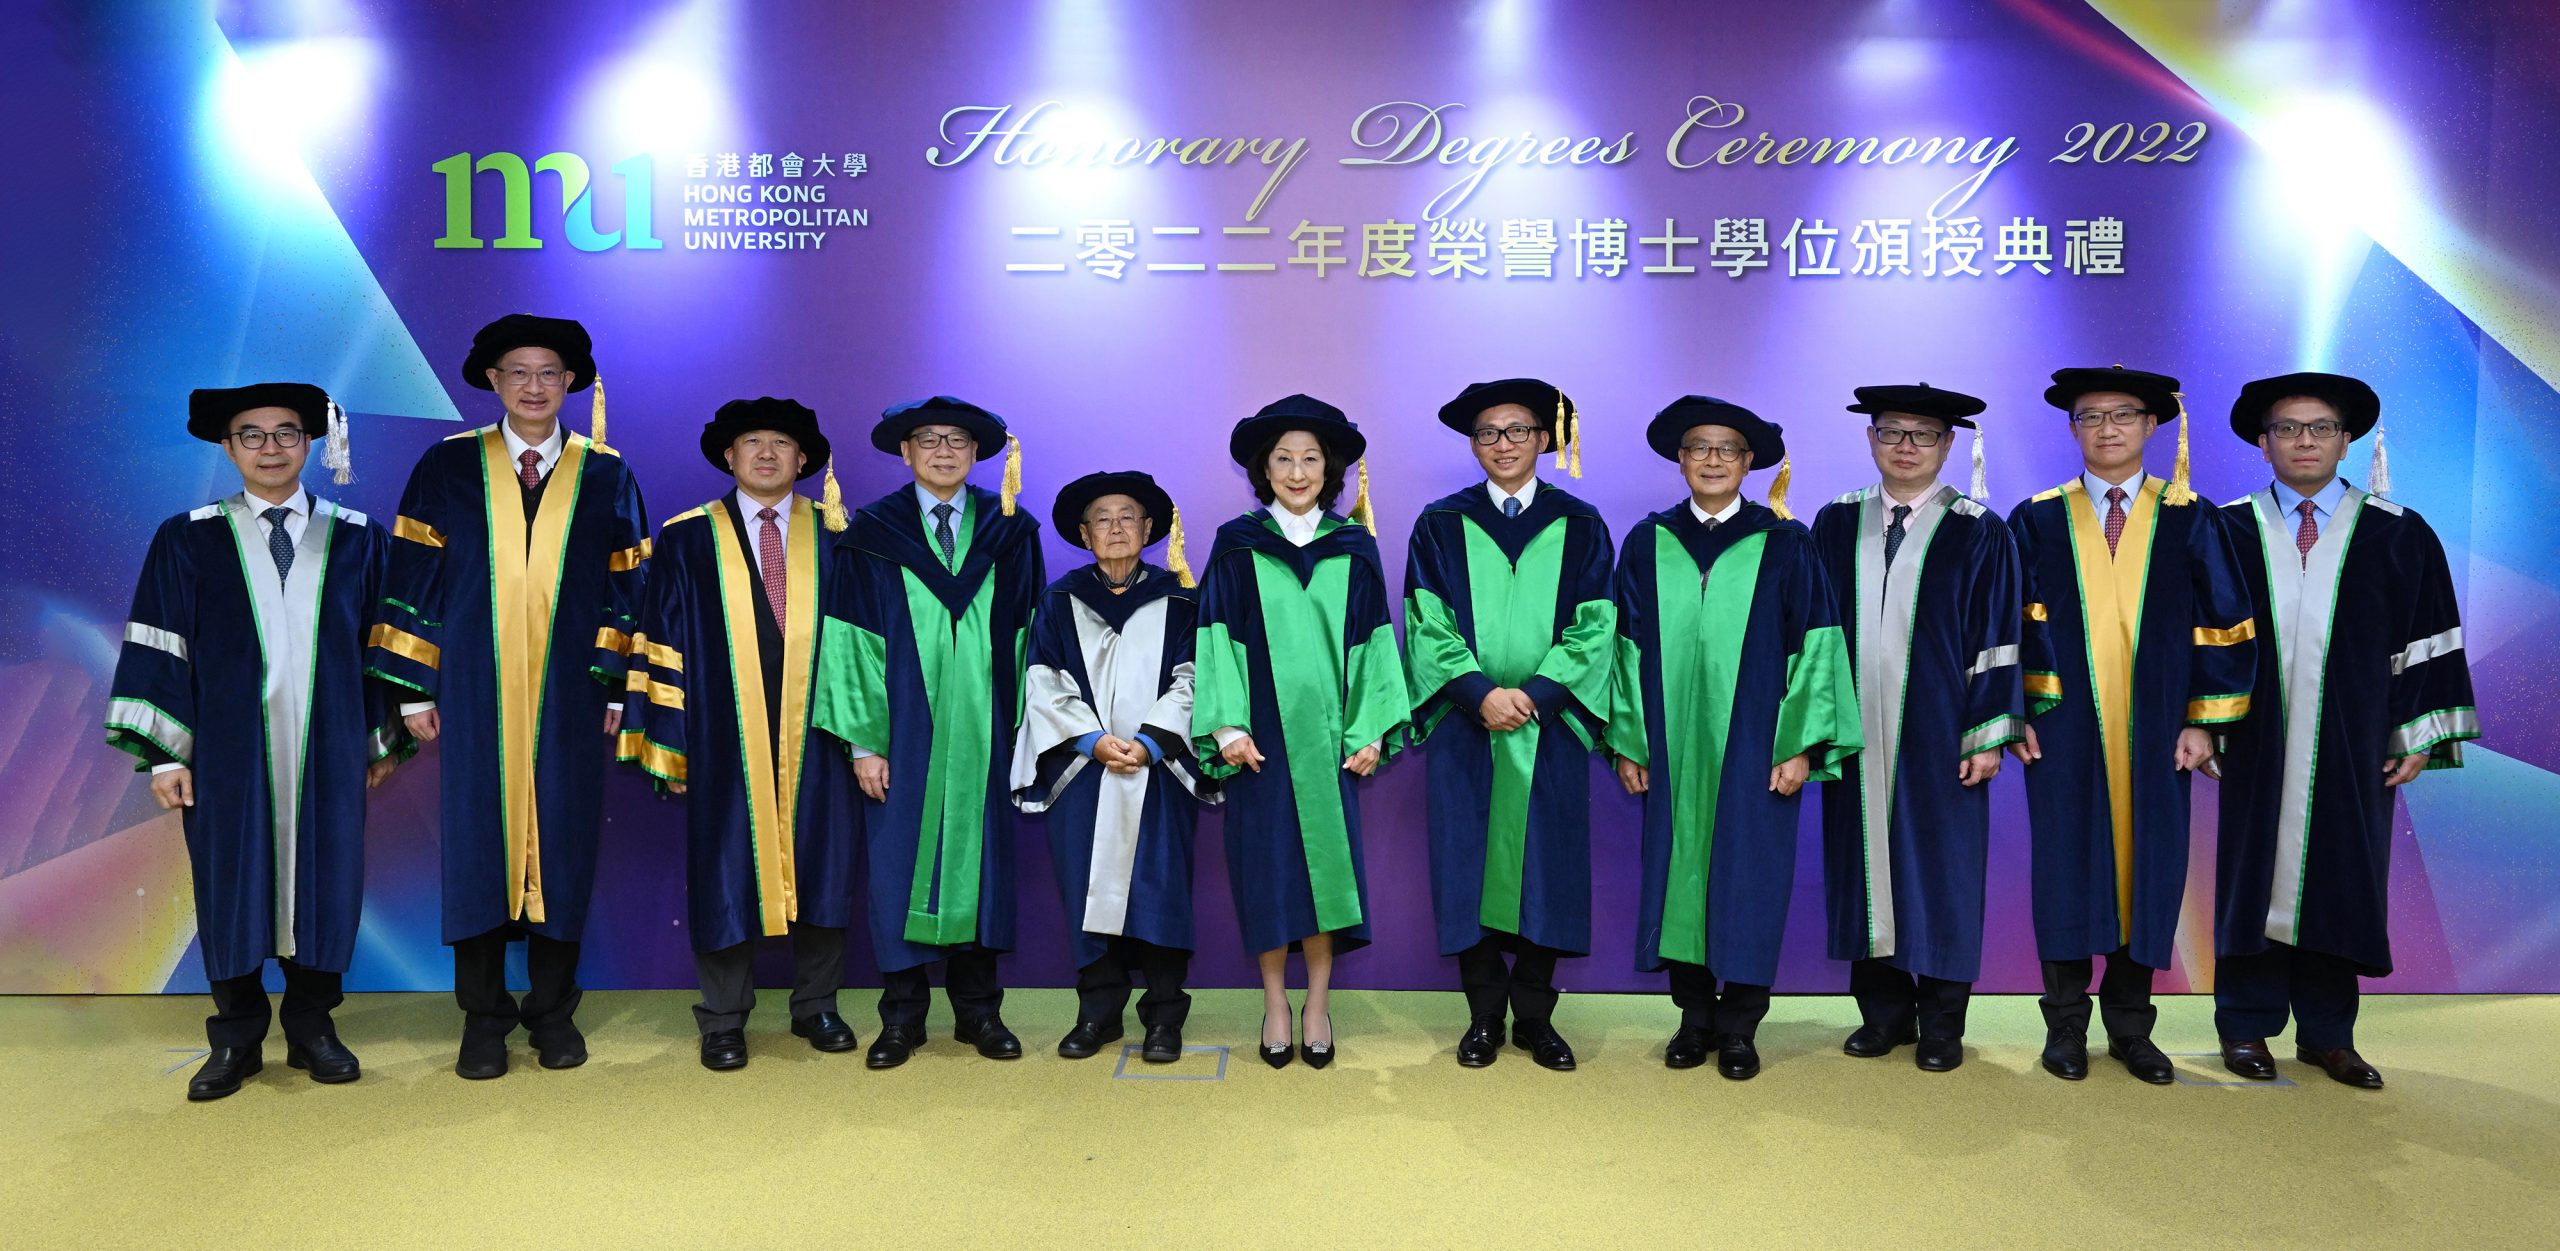 Group photo of the Principal Officers of Hong Kong Metropolitan University and the five Honorary Doctorate recipients.